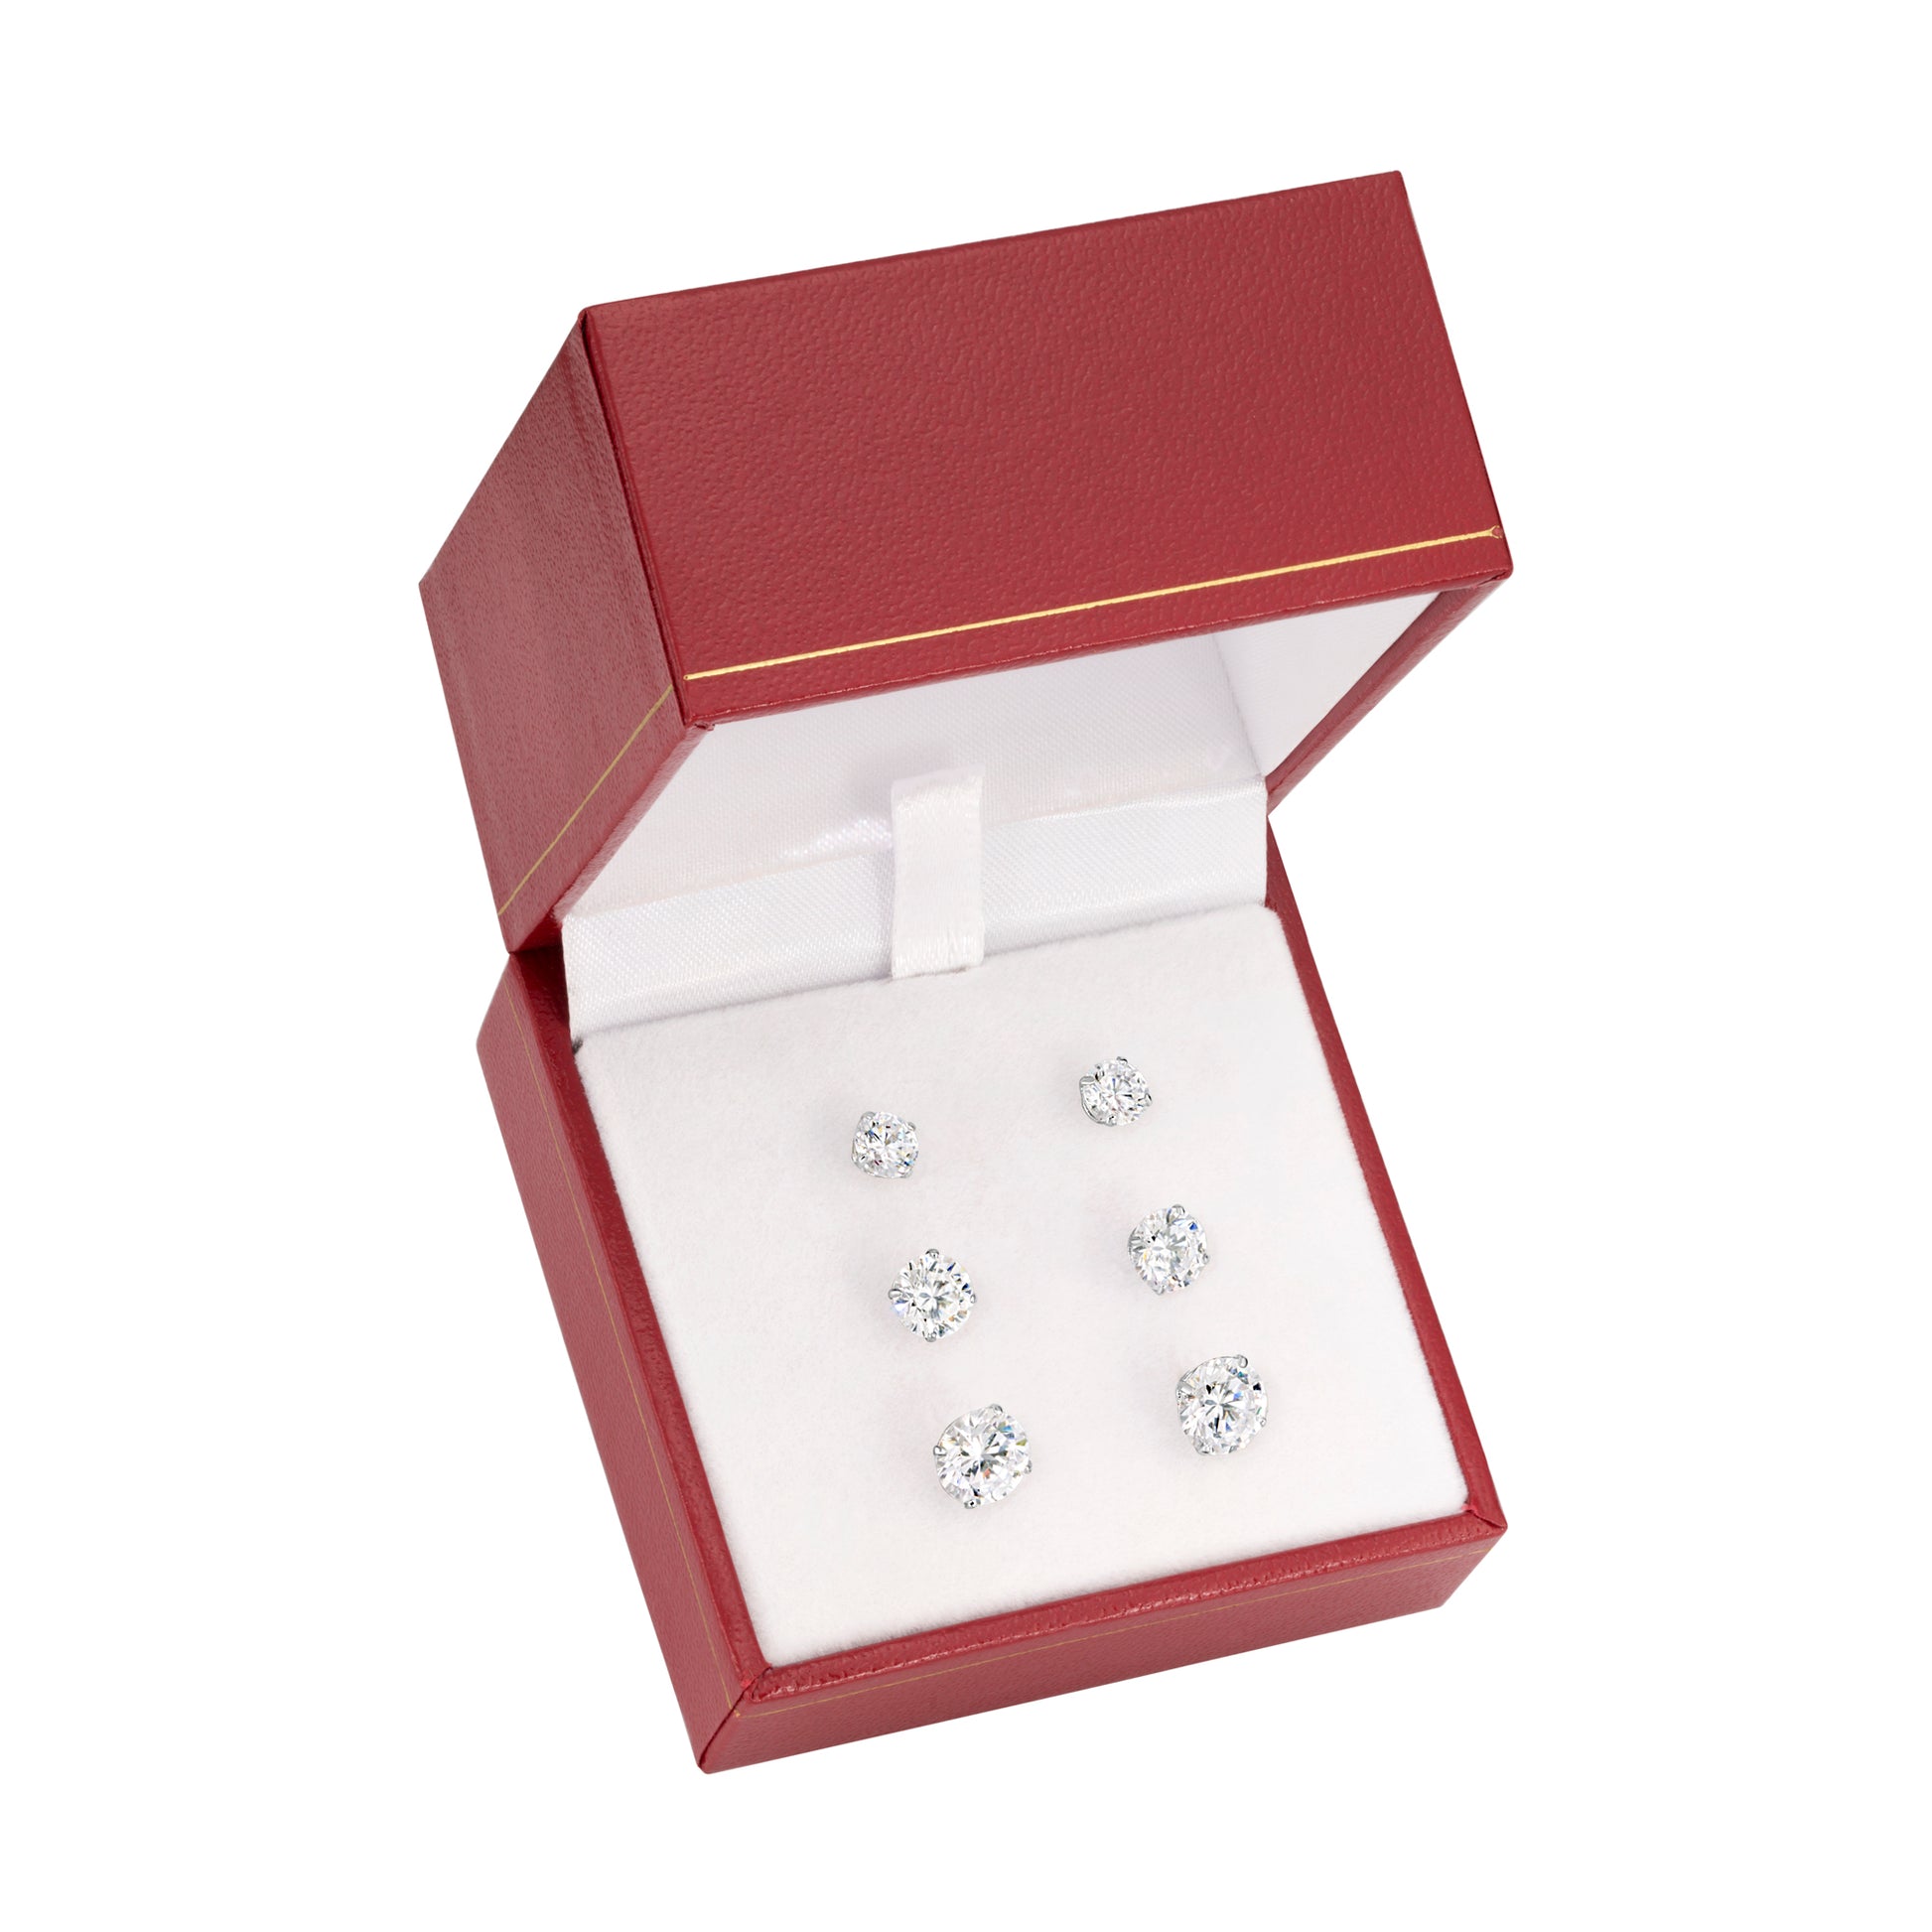 Want to Secure Your Jewelry with Jewelry Clasps? Here are 8 Variants -  Diamonds Inc